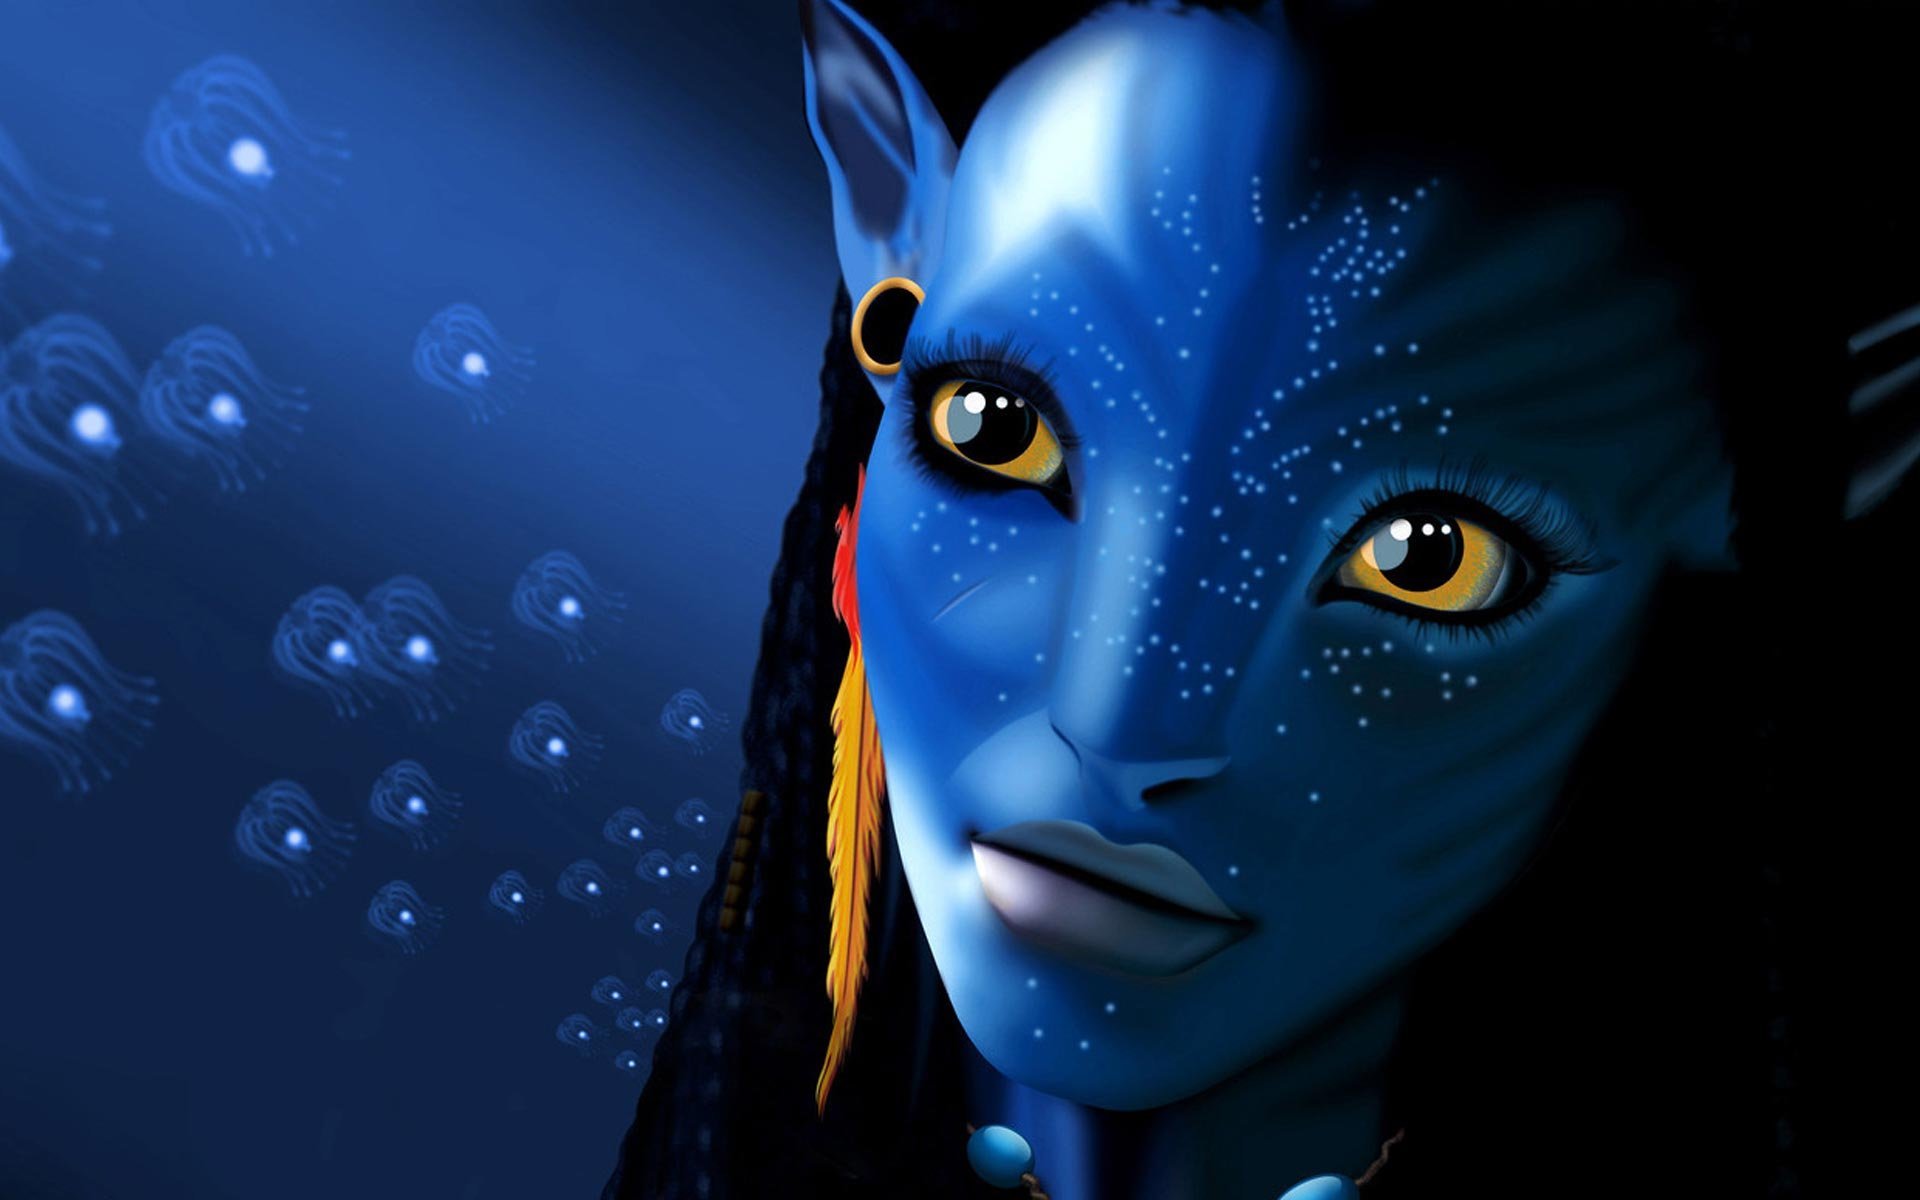 Avatar for iphone download